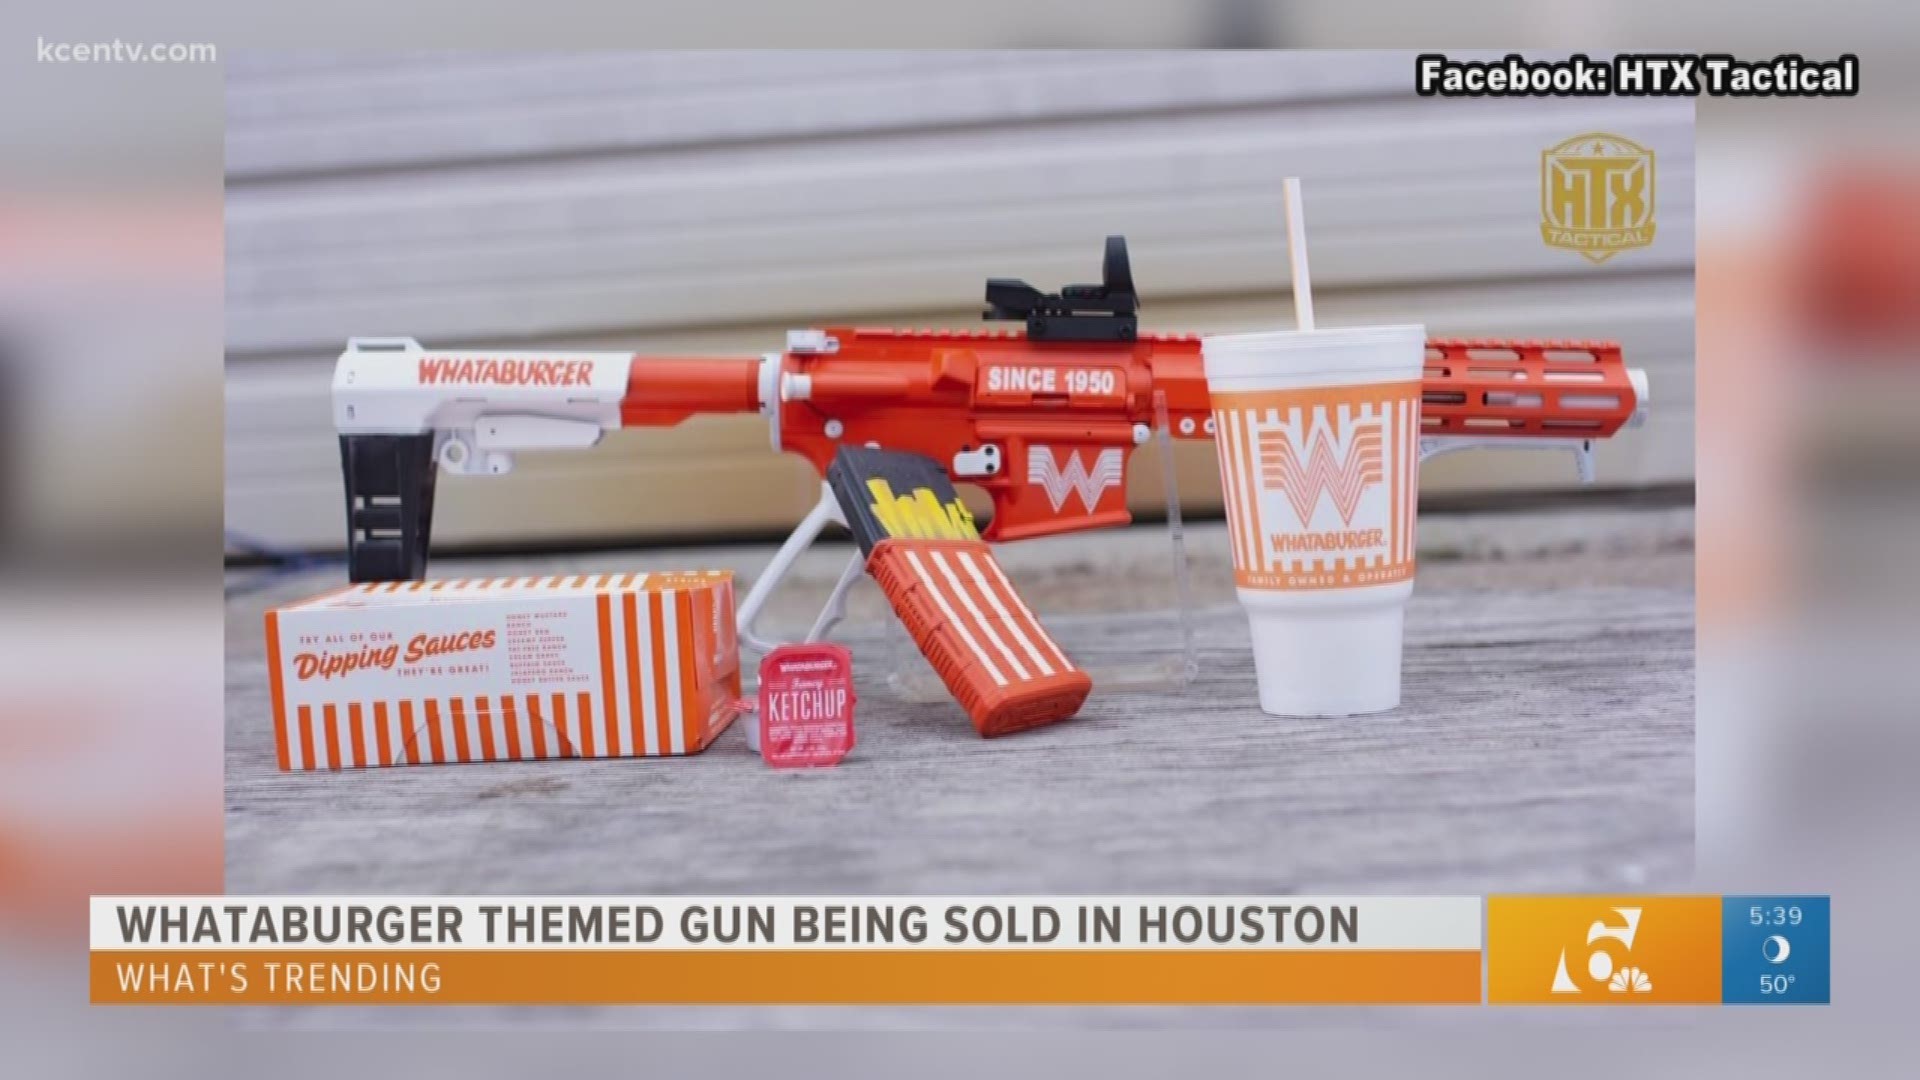 Justin Bieber takes a break from music, Whataburger themed gun being sold in Houston for $1,800 and other trending news.